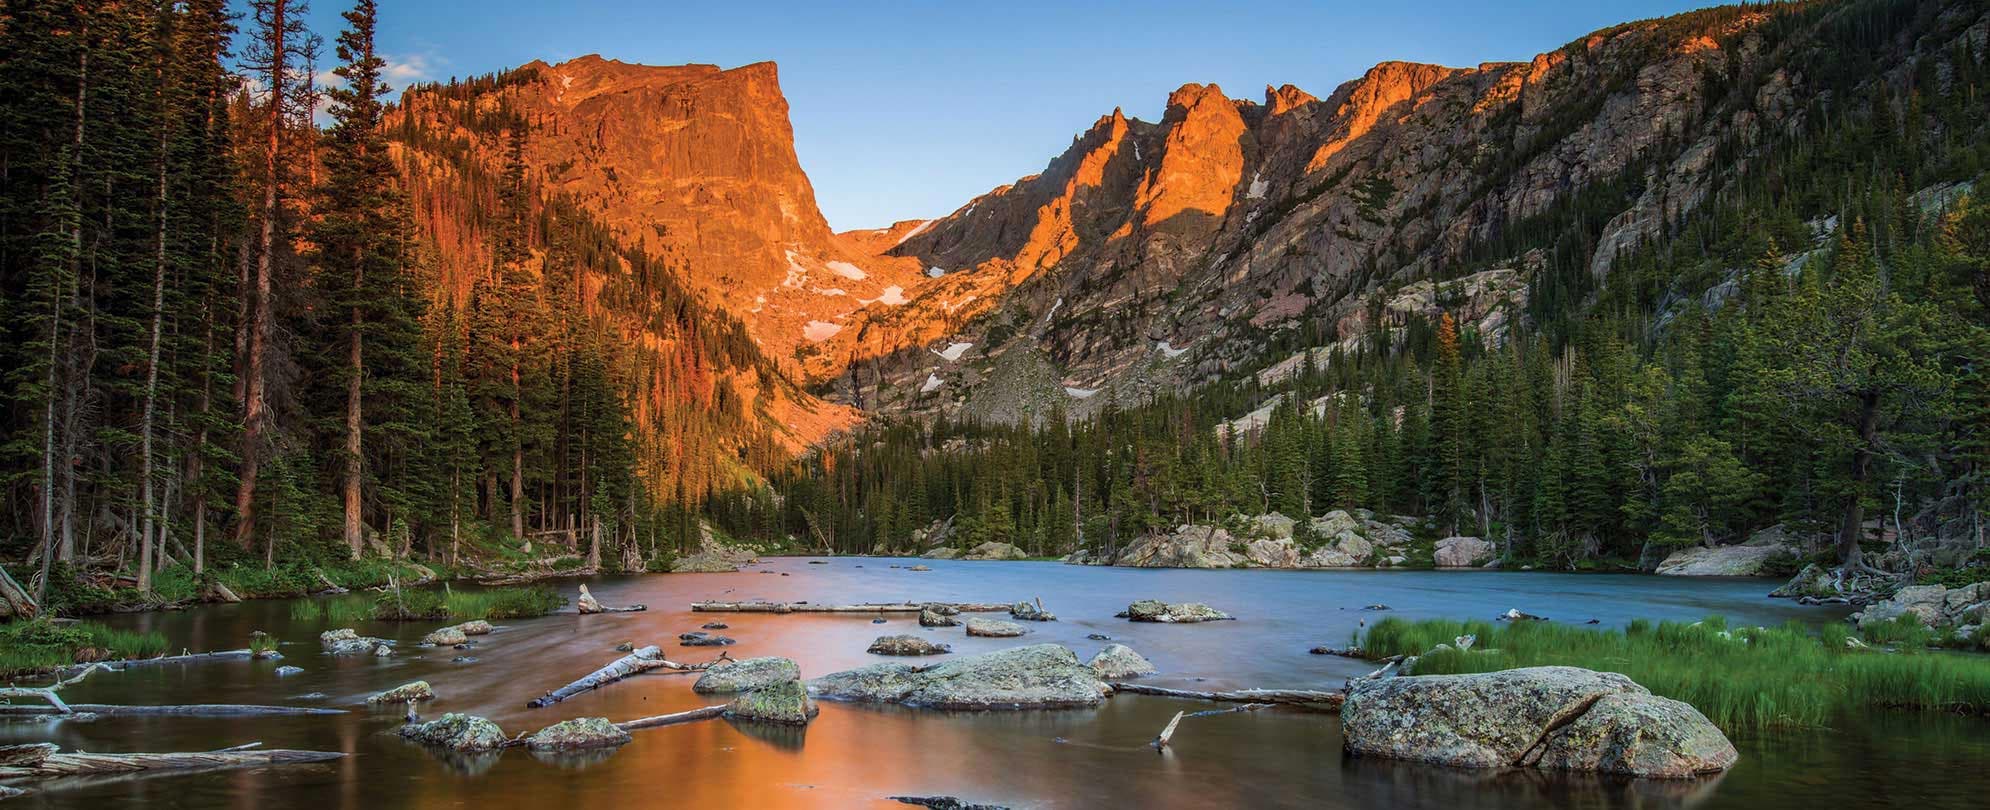 Mountains behind a rocky lake during golden hour at Rocky Mountain National Park in Colorado.